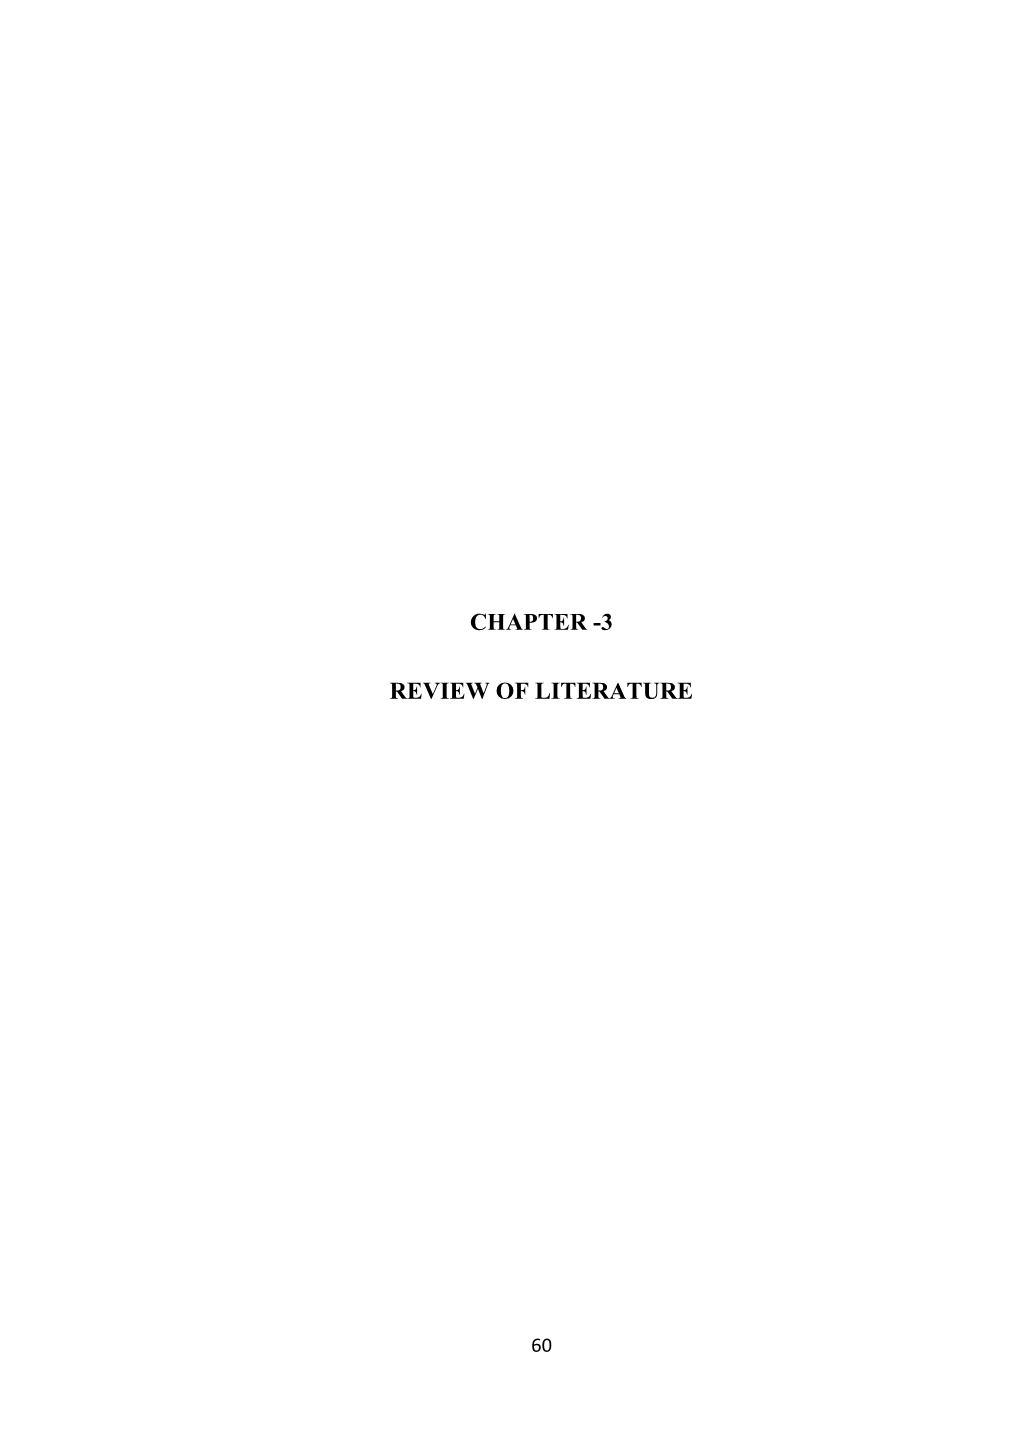 Chapter -3 Review of Literature